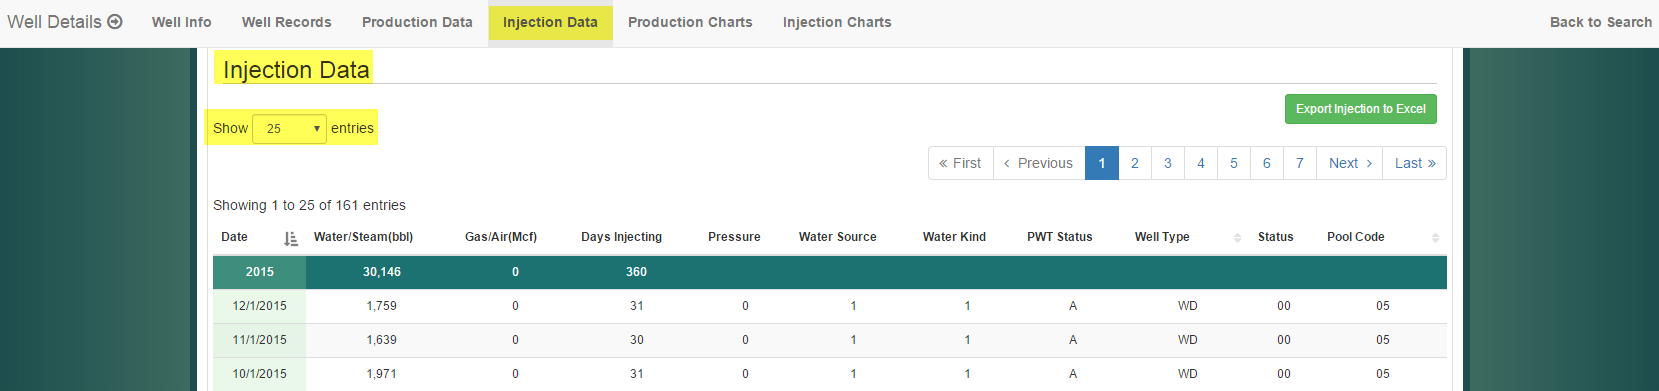 View monthly injection data reports in this section